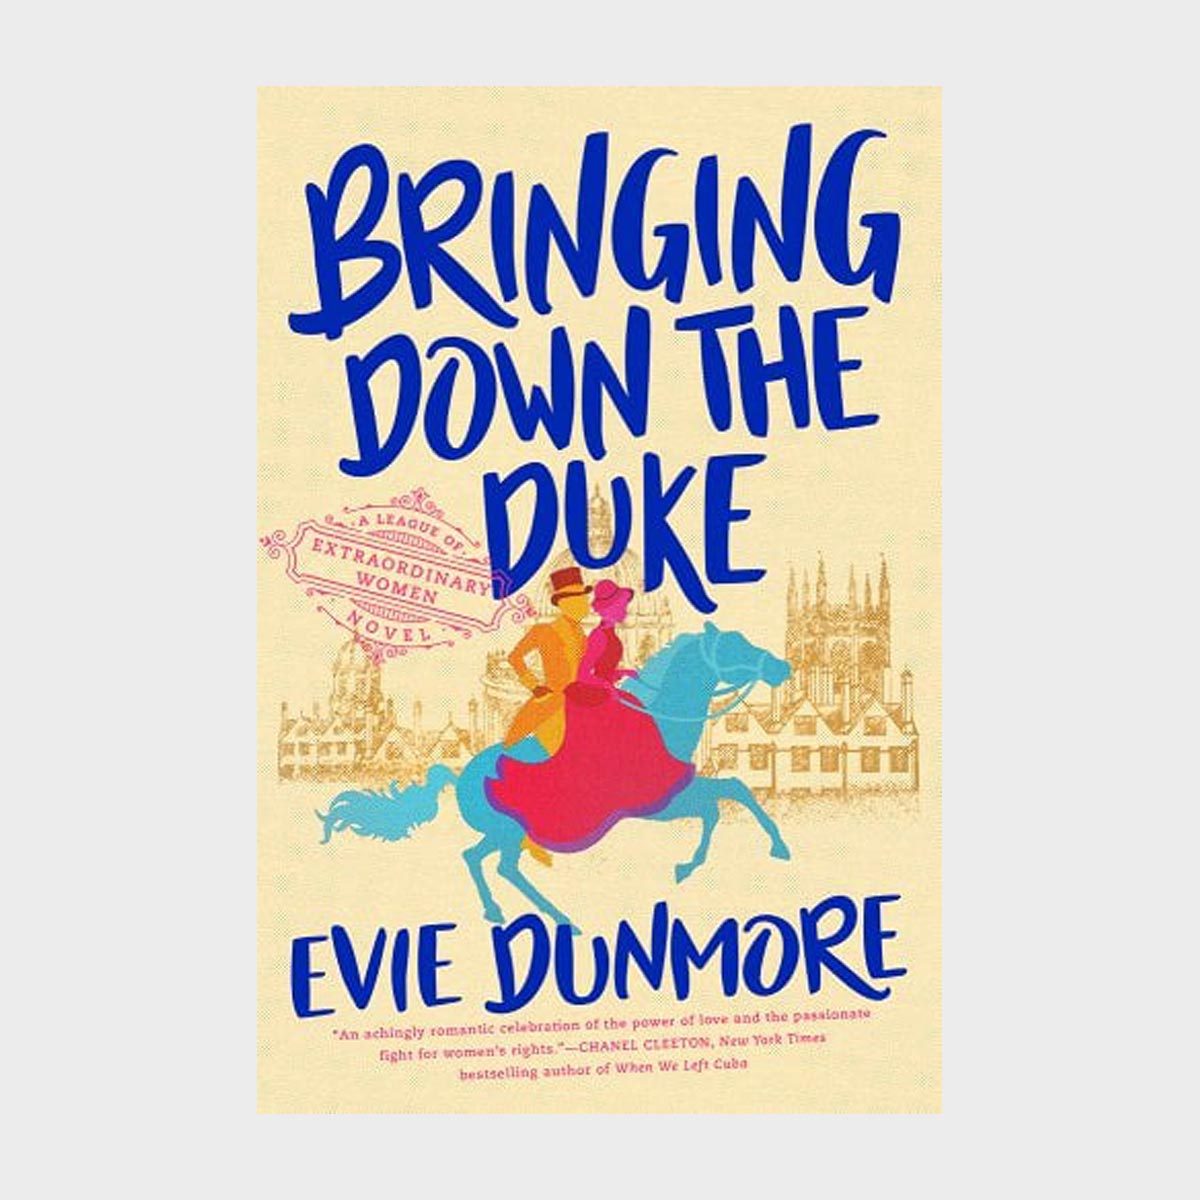 <p class=""><strong>Series starter: </strong><a href="https://bookshop.org/p/books/bringing-down-the-duke-evie-dunmore/9570577" rel="noopener noreferrer"><em>Bringing Down the Duke</em></a></p> <p class=""><strong>What you're in for: </strong>Killer banter and independent women</p> <p>With the release of <em>Bringing Down the Duke</em> in 2019, Evie Dunmore sent <a href="https://www.rd.com/list/historical-fiction-books/" rel="noopener noreferrer">historical fiction</a> fans clamoring for more high jinks in the Victorian era. Each of the series's four books focuses on a different suffragette studying at the University of Oxford. In the series starter, readers are introduced to Annabelle, a strong-willed scholar who intends to recruit politically minded Sebastian Devereux to the rising women's suffrage movement. Sebastian is a duke who shouldn't be falling for a commoner, but he can't seem to pull himself from Annabelle's orbit. The most recent of the novels (<em>The Gentleman's Gambit</em>) released late last year and is as deliciously entertaining and heart-meltingly swoony as the rest.</p> <p class="listicle-page__cta-button-shop"><a class="shop-btn" href="https://bookshop.org/p/books/bringing-down-the-duke-evie-dunmore/9570577">Shop Now</a></p> <p><strong>Looking for your next great book? Read four of today's bestselling novels in the time it takes to read one with <a href="https://books.readersdigest.com/pubs/RD/RDB/FF-INT-2309-new-forest-OP1.jsp?cds_page_id=274987&cds_mag_code=RDB&id=1697231673220&lsid=32861614332042825&vid=1&utm_medium=paidsocial&cds_response_key=1DMCLDU103&utm_placement=drivetoweb&utm_source=facebook&utm_keycode=1DMCLDU103&utm_campaign=1h6_20230901_drivetoweb" rel="noopener noreferrer">Fiction Favorites</a>!</strong></p>